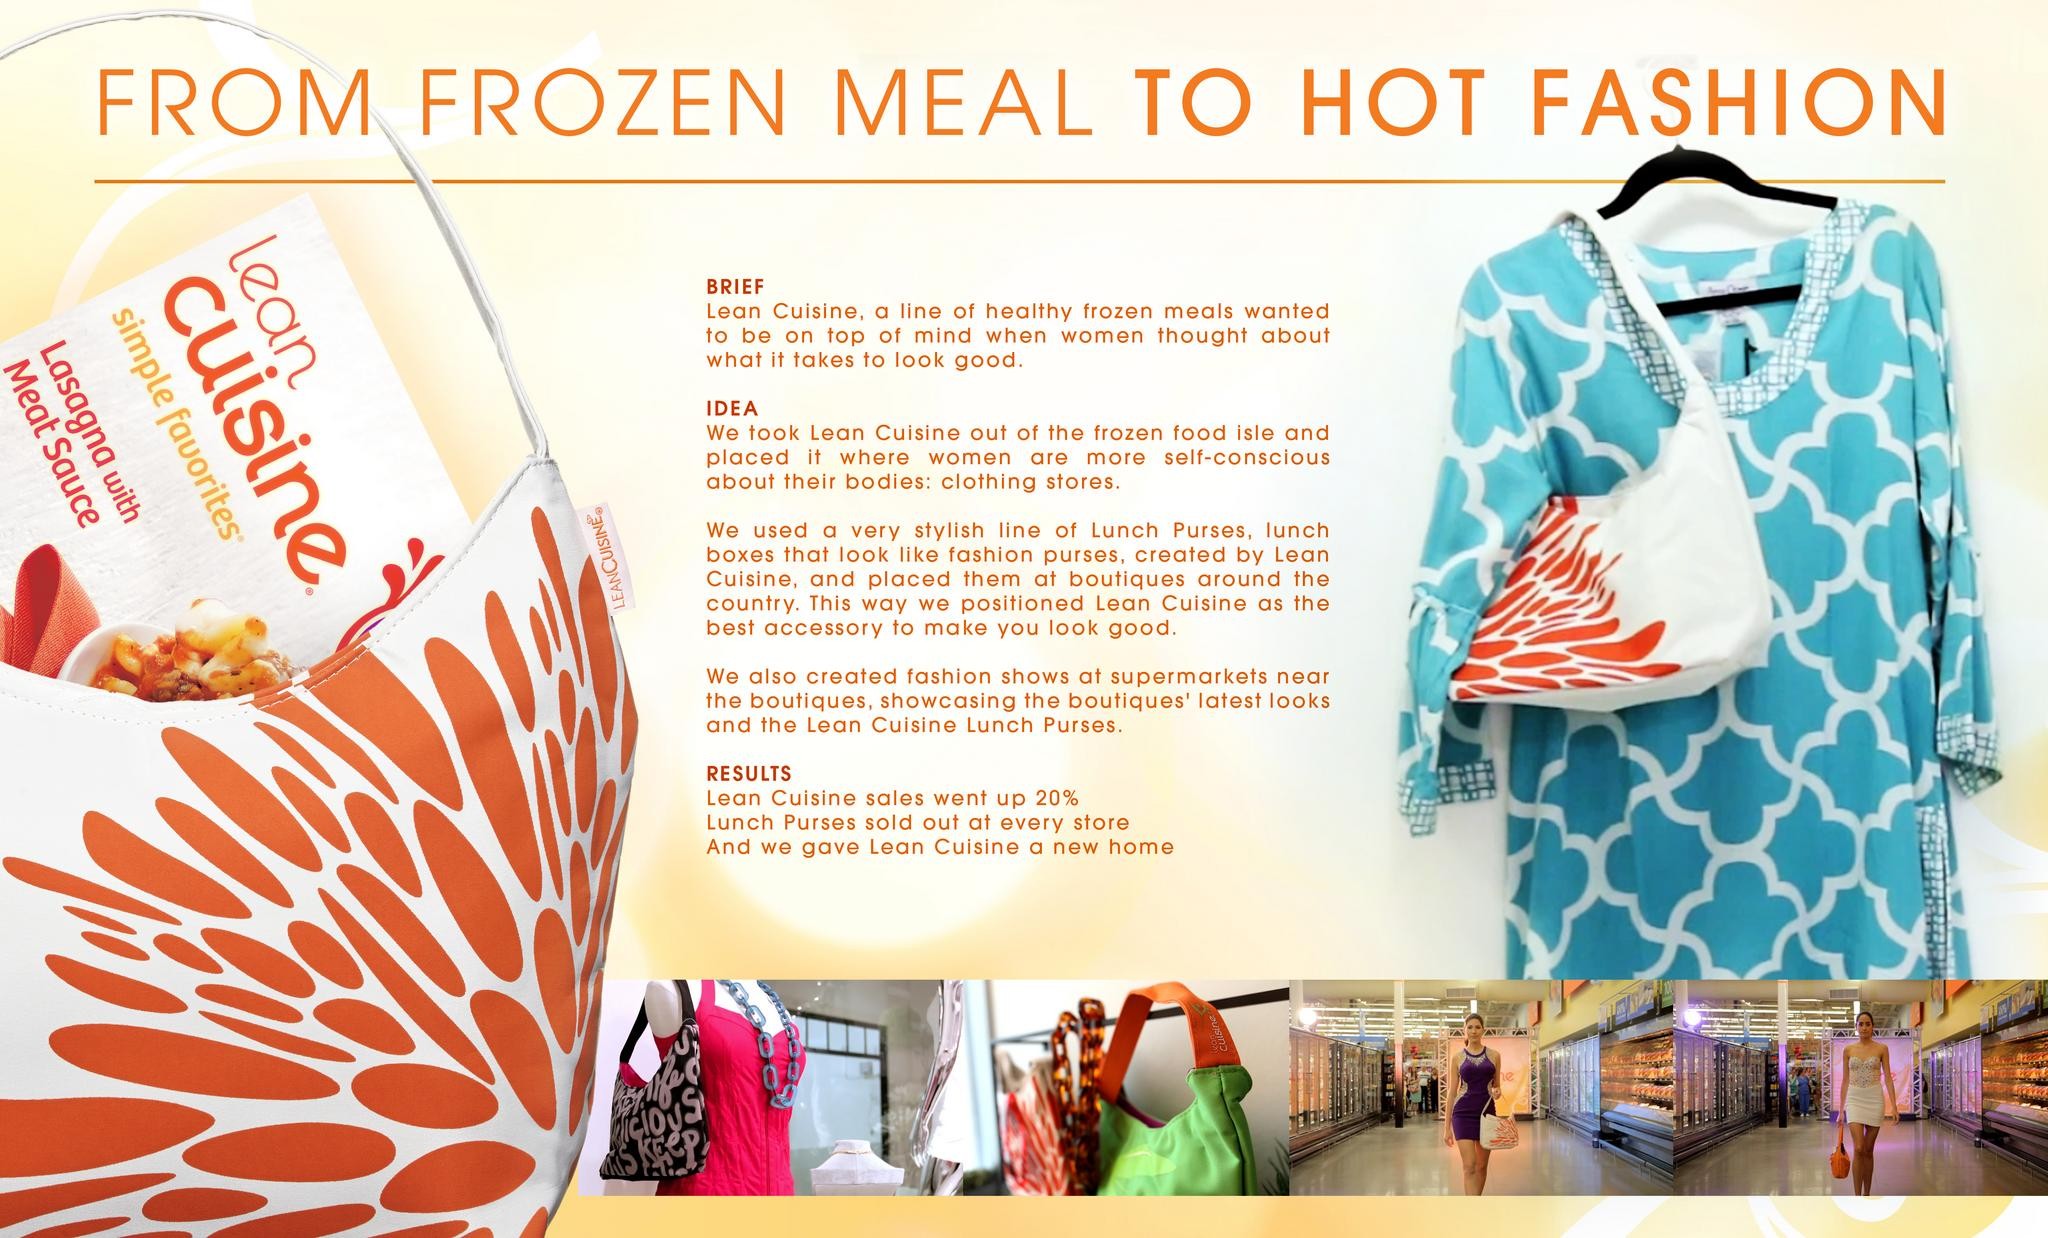 FROM FROZEN MEAL TO HOT FASHION